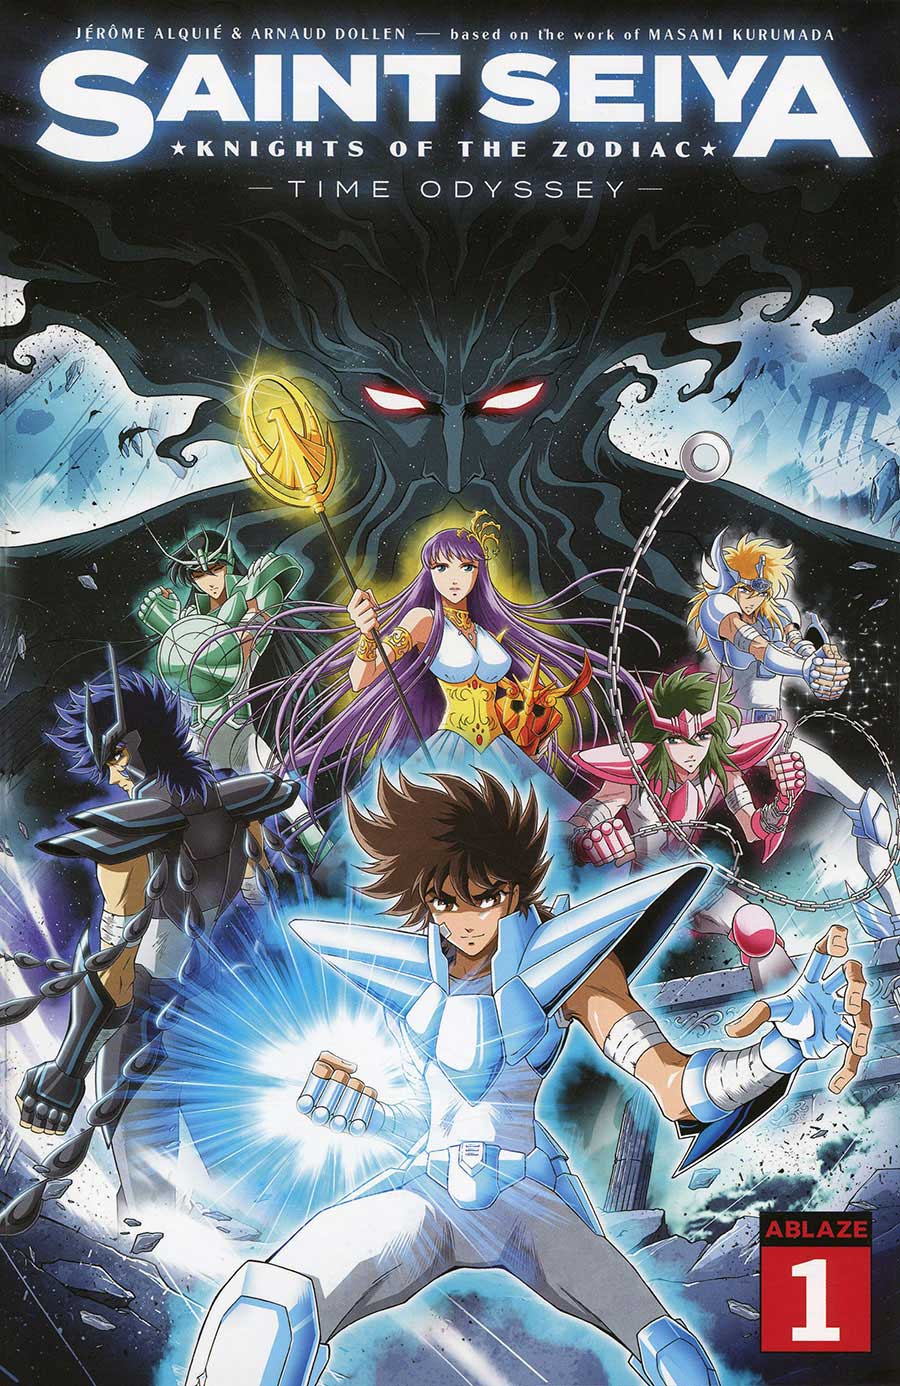 Saint Seiya Knights Of The Zodiac Time Odyssey #1 Cover A Regular Jerome Alquie Cover